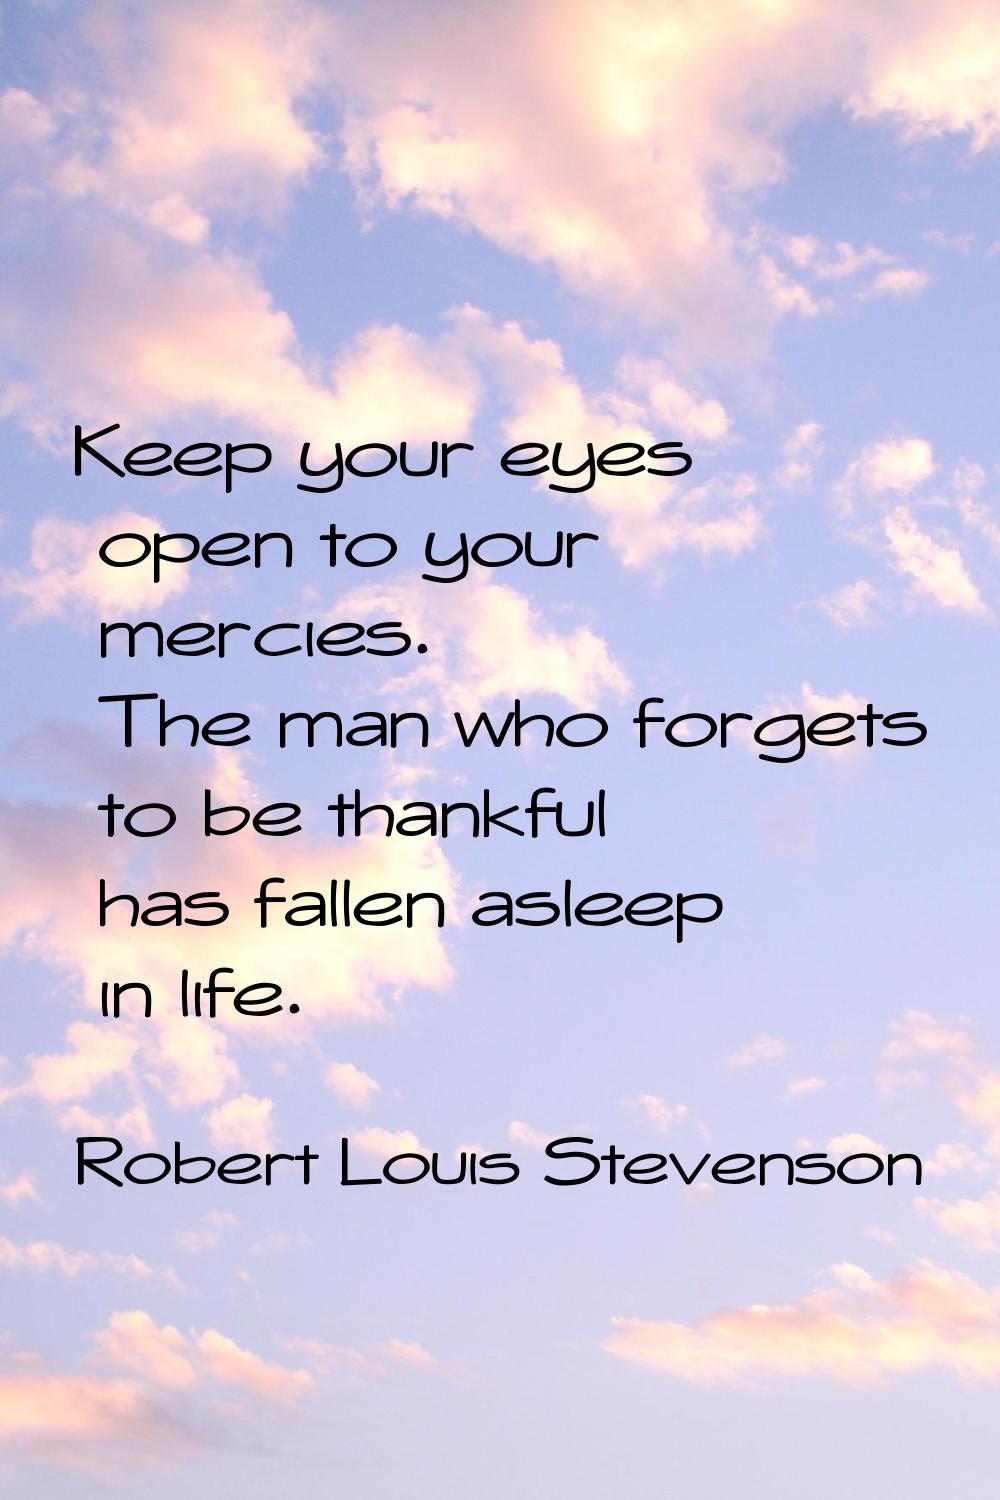 Keep your eyes open to your mercies. The man who forgets to be thankful has fallen asleep in life.